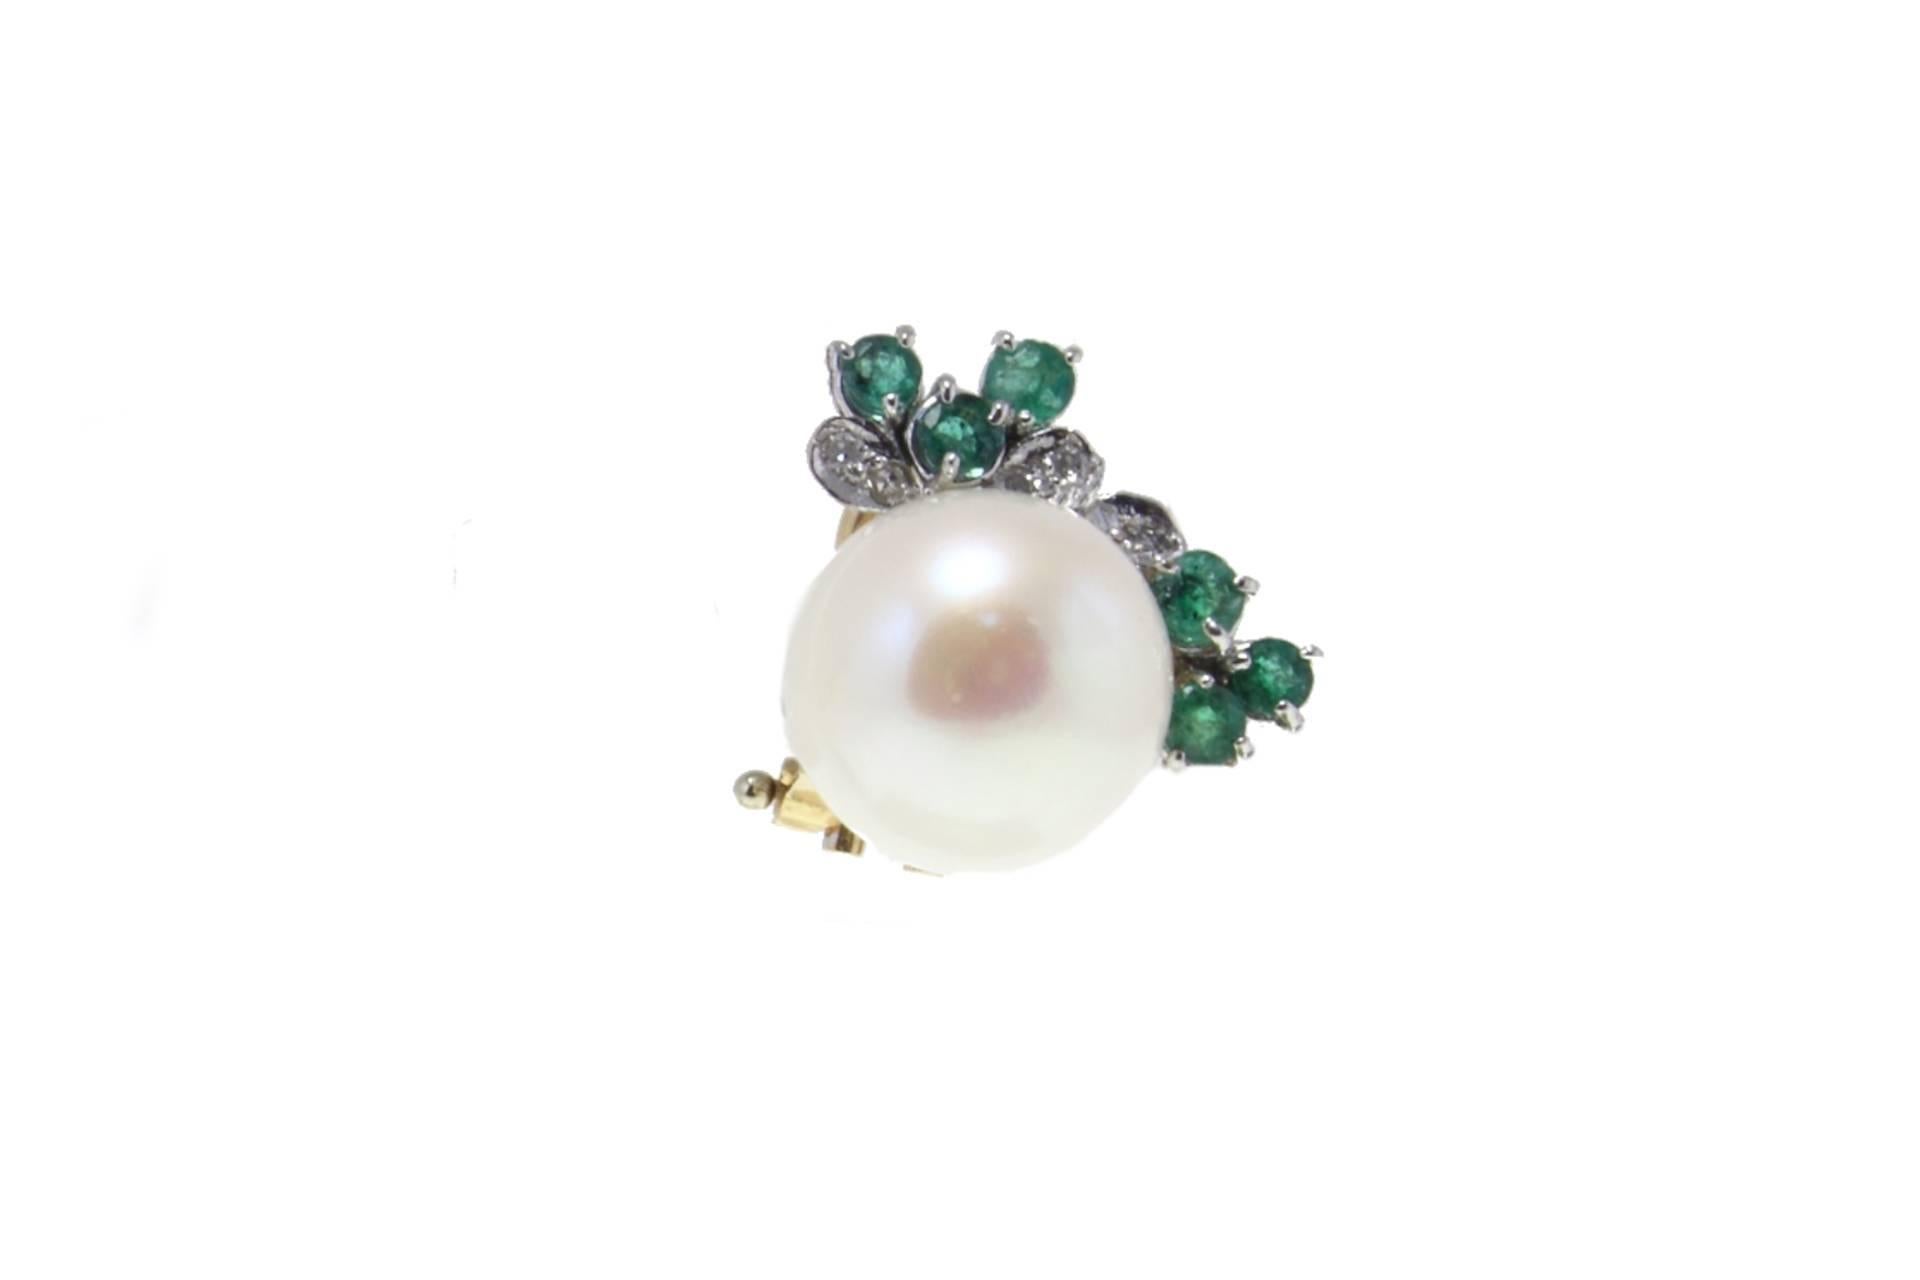 Pearl earrings in 14kt yellow and white gold embellished with a crown of diamonds and emeralds.

pearls:  11mm/  0.43inch
tot weight 8.4gr
r.f.  ghia